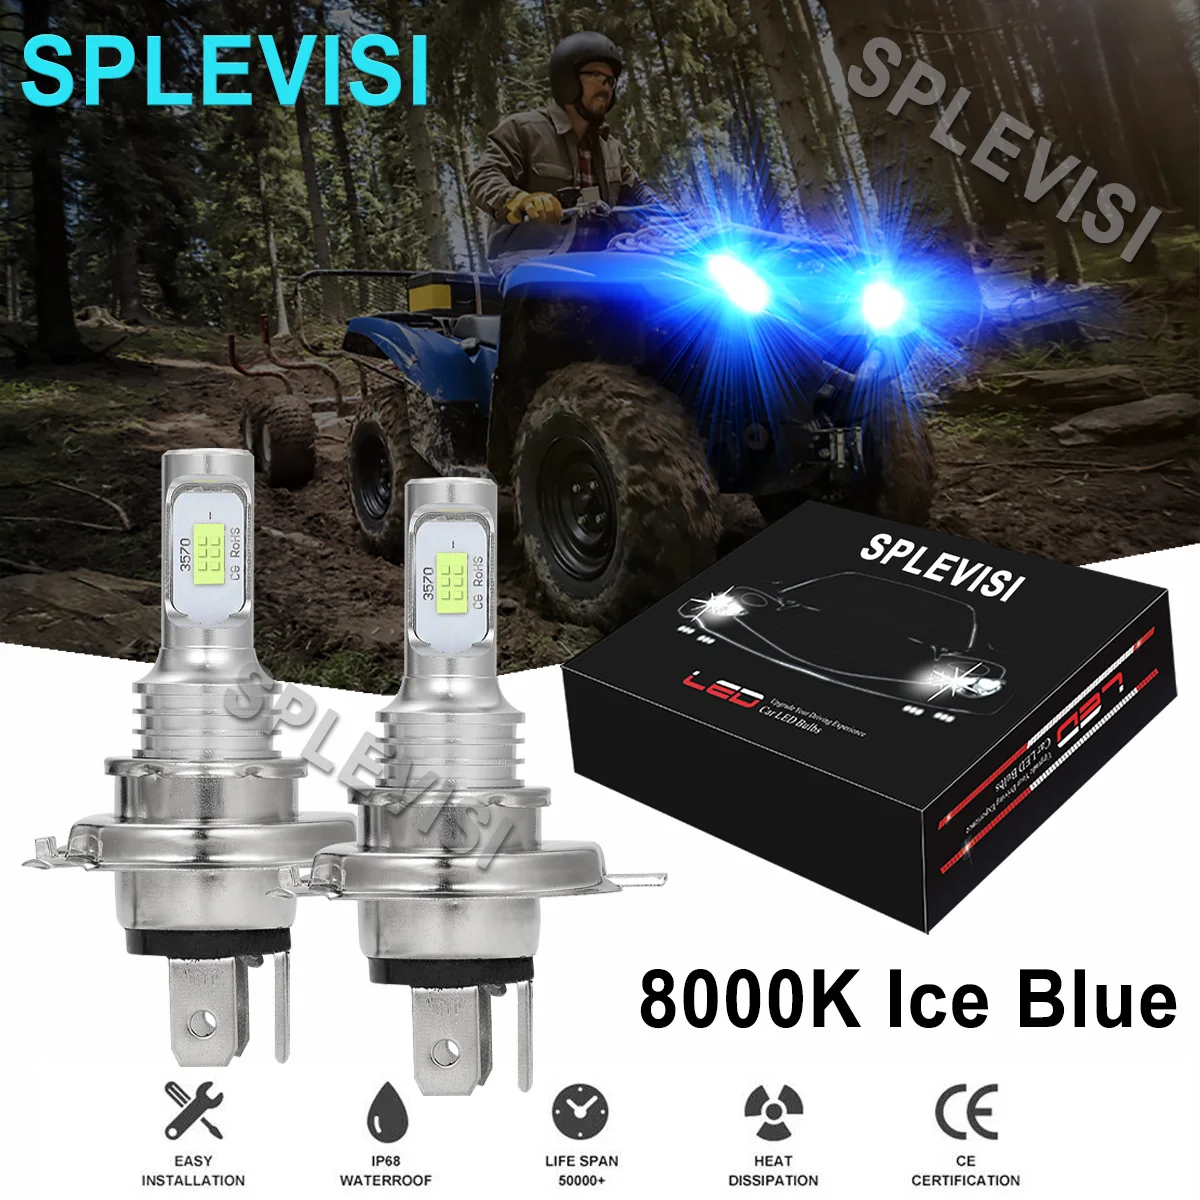 2x 70W Ice blue LED Headlight Bulbs For Yamaha Grizzly 300 2012-2014 Grizzly 550 2009 2010 2011-2015 Grizzly 700 2007 2008-2018